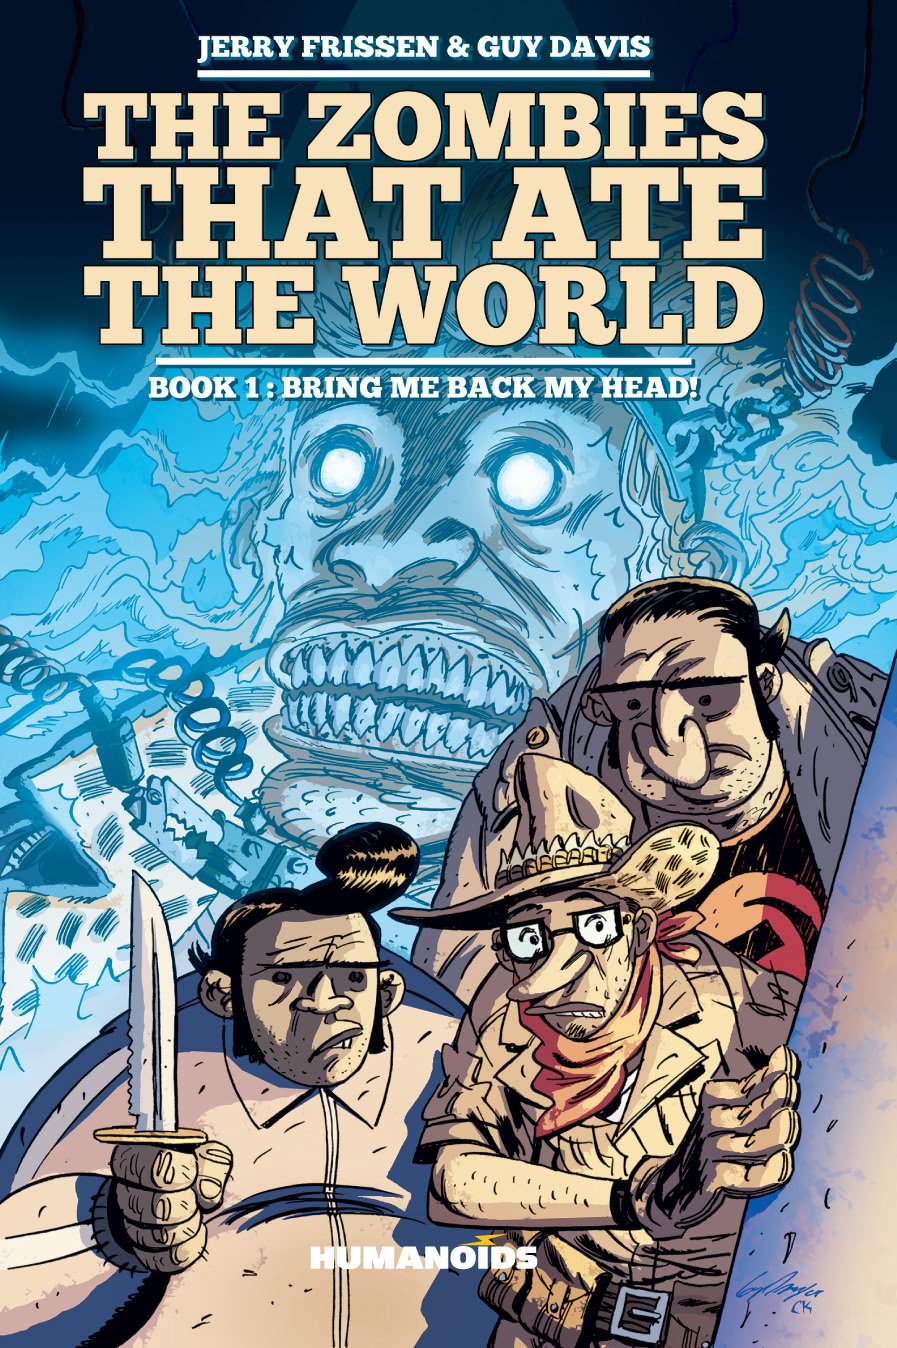 The Zombies That Ate The World Book 1: Bring Me Back My Head!